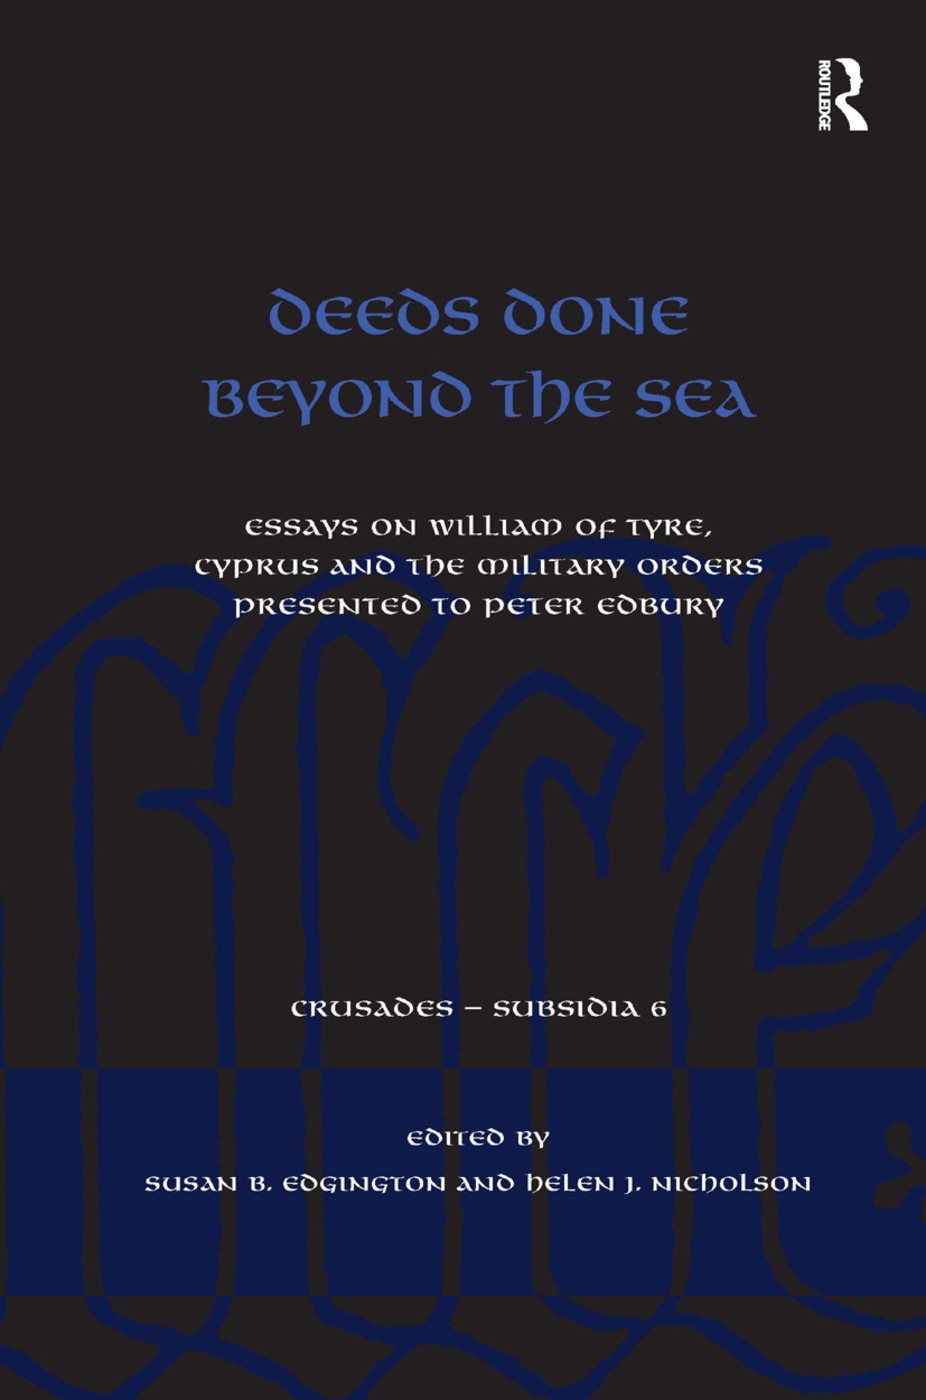 Deeds Done Beyond the Sea: Essays on William of Tyre, Cyprus and the Military Orders Presented to Peter Edbury